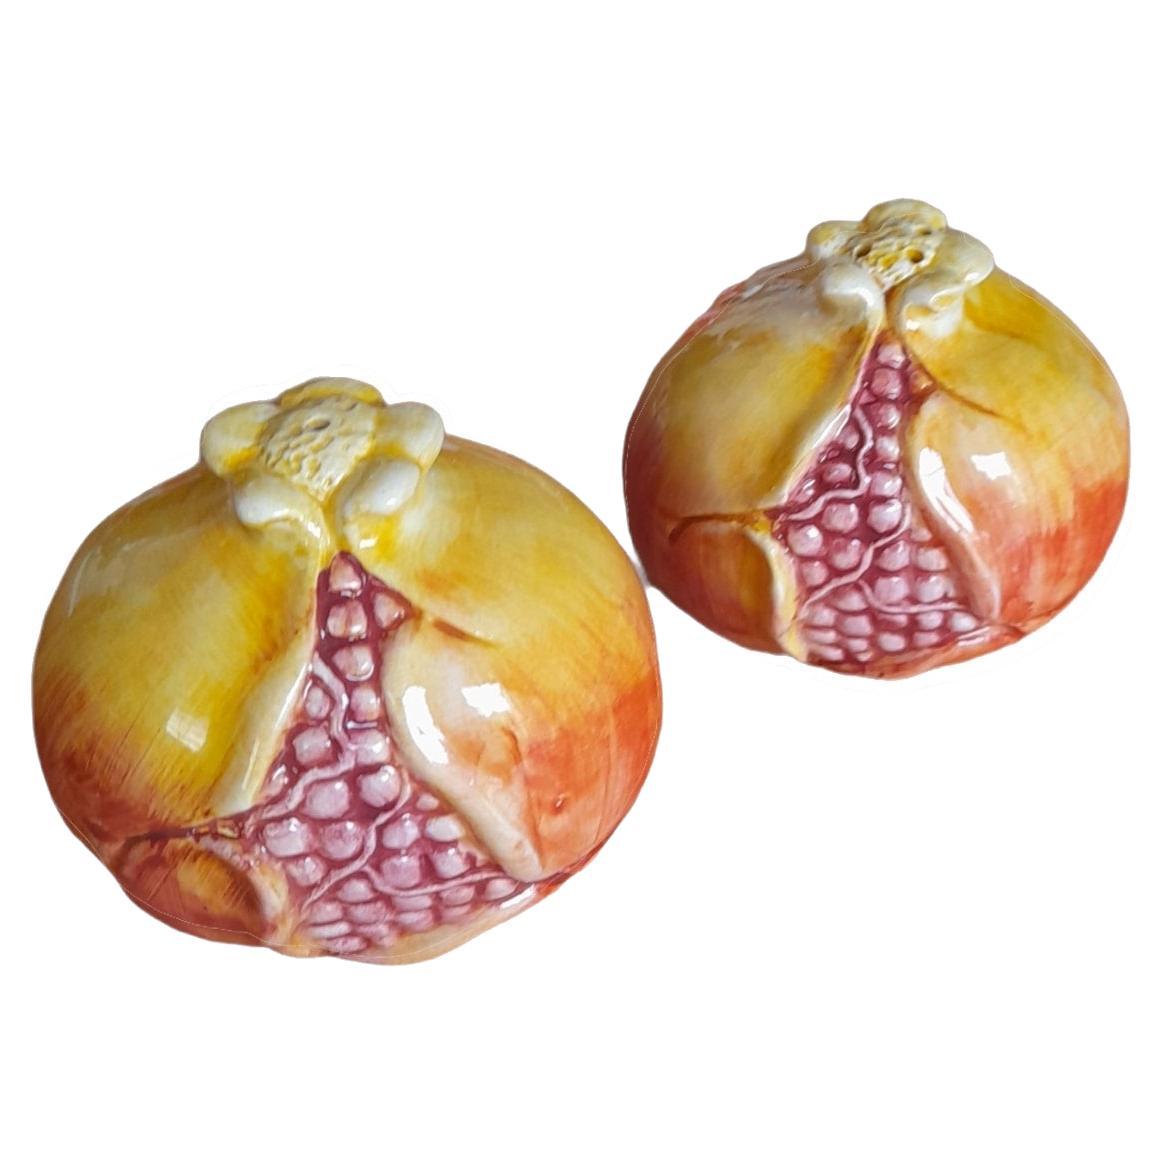 Pomegranate Hand Painted Ceramic Starter Set of 2 For Sale